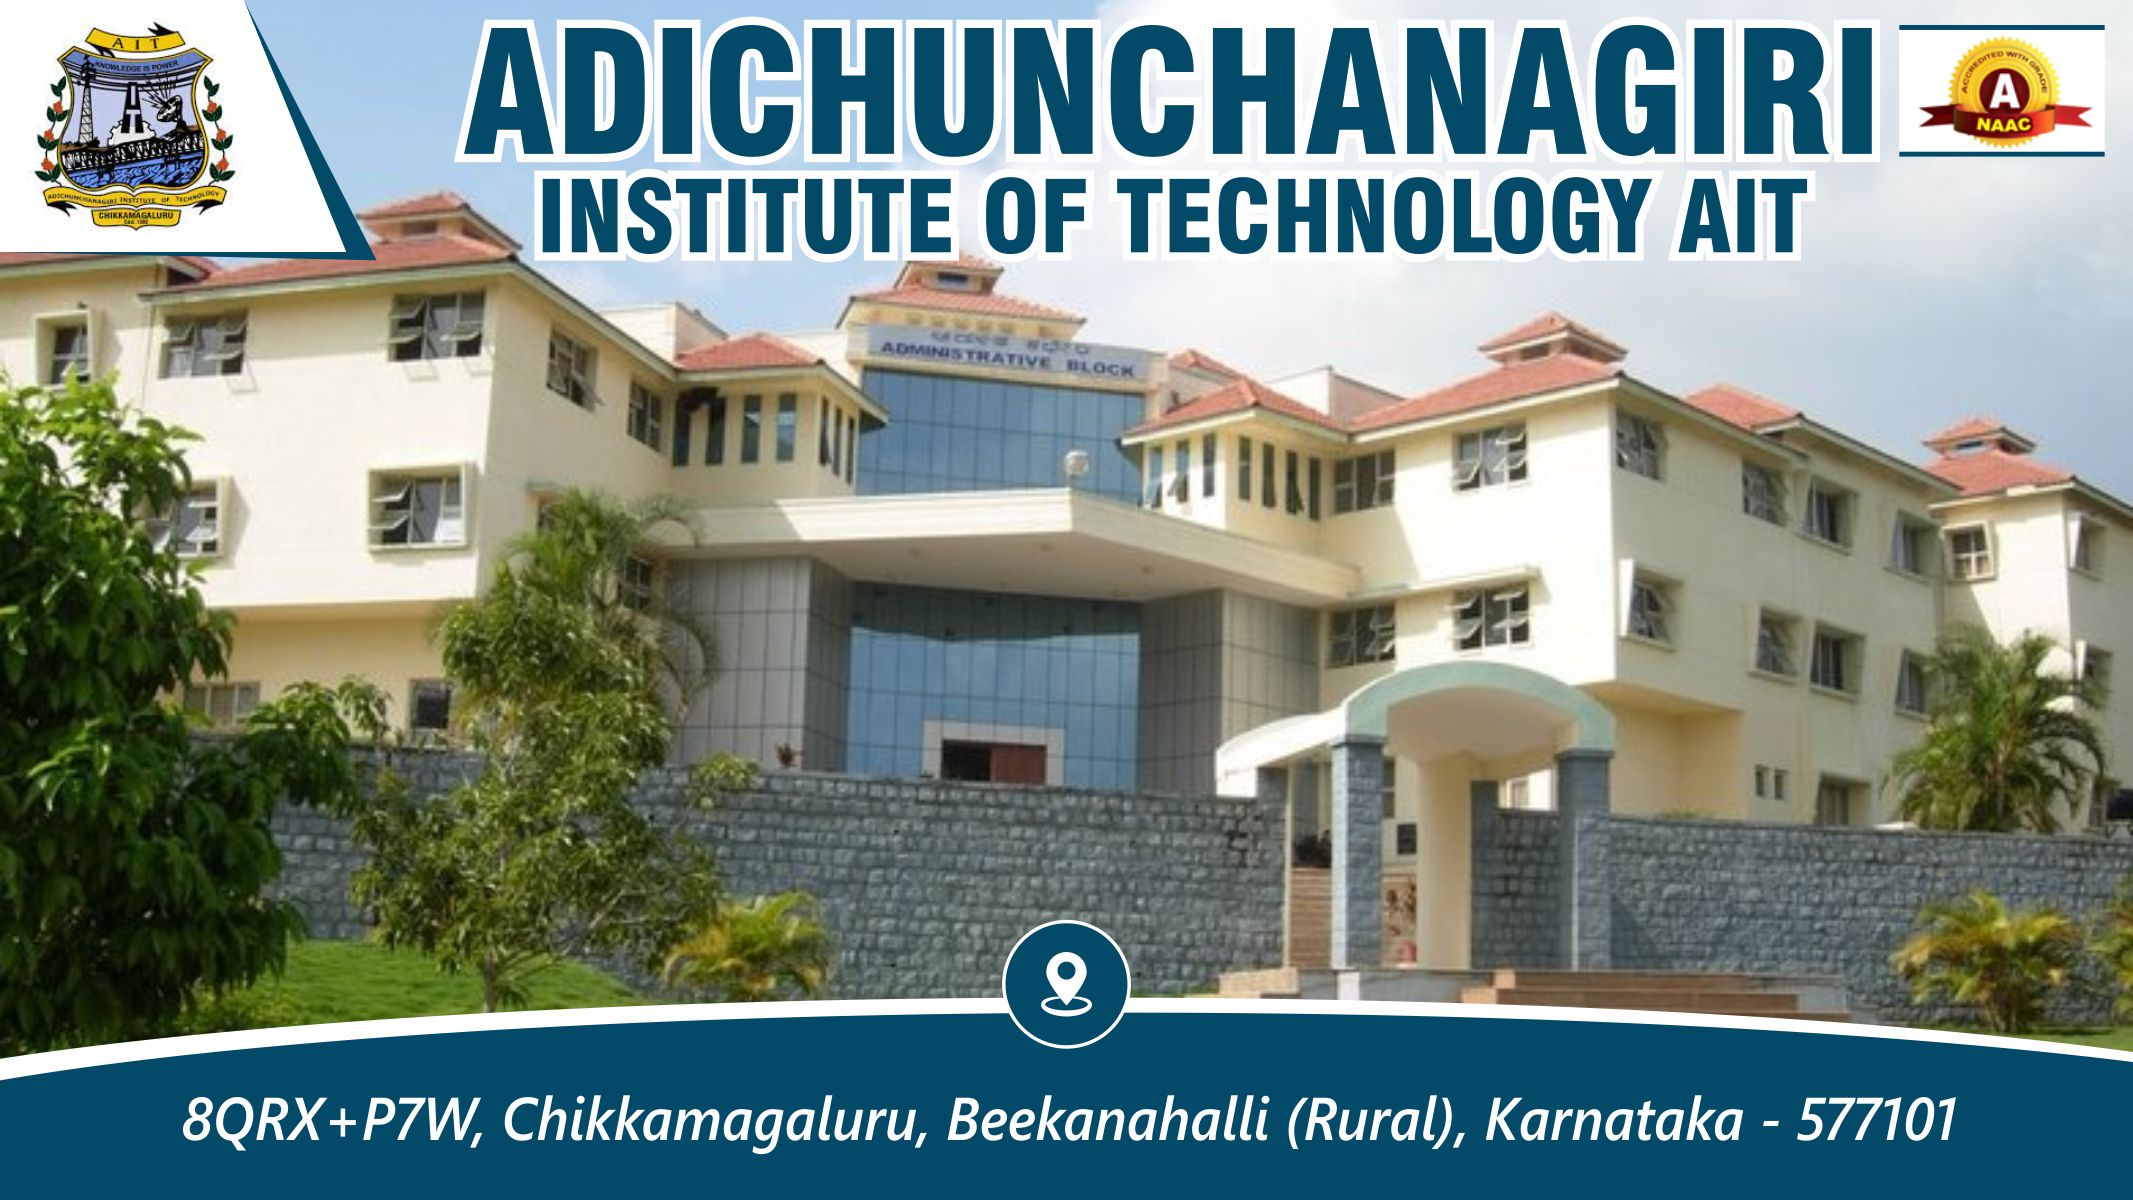 Out Side View of Adichunchanagiri Institute of Technology - AIT